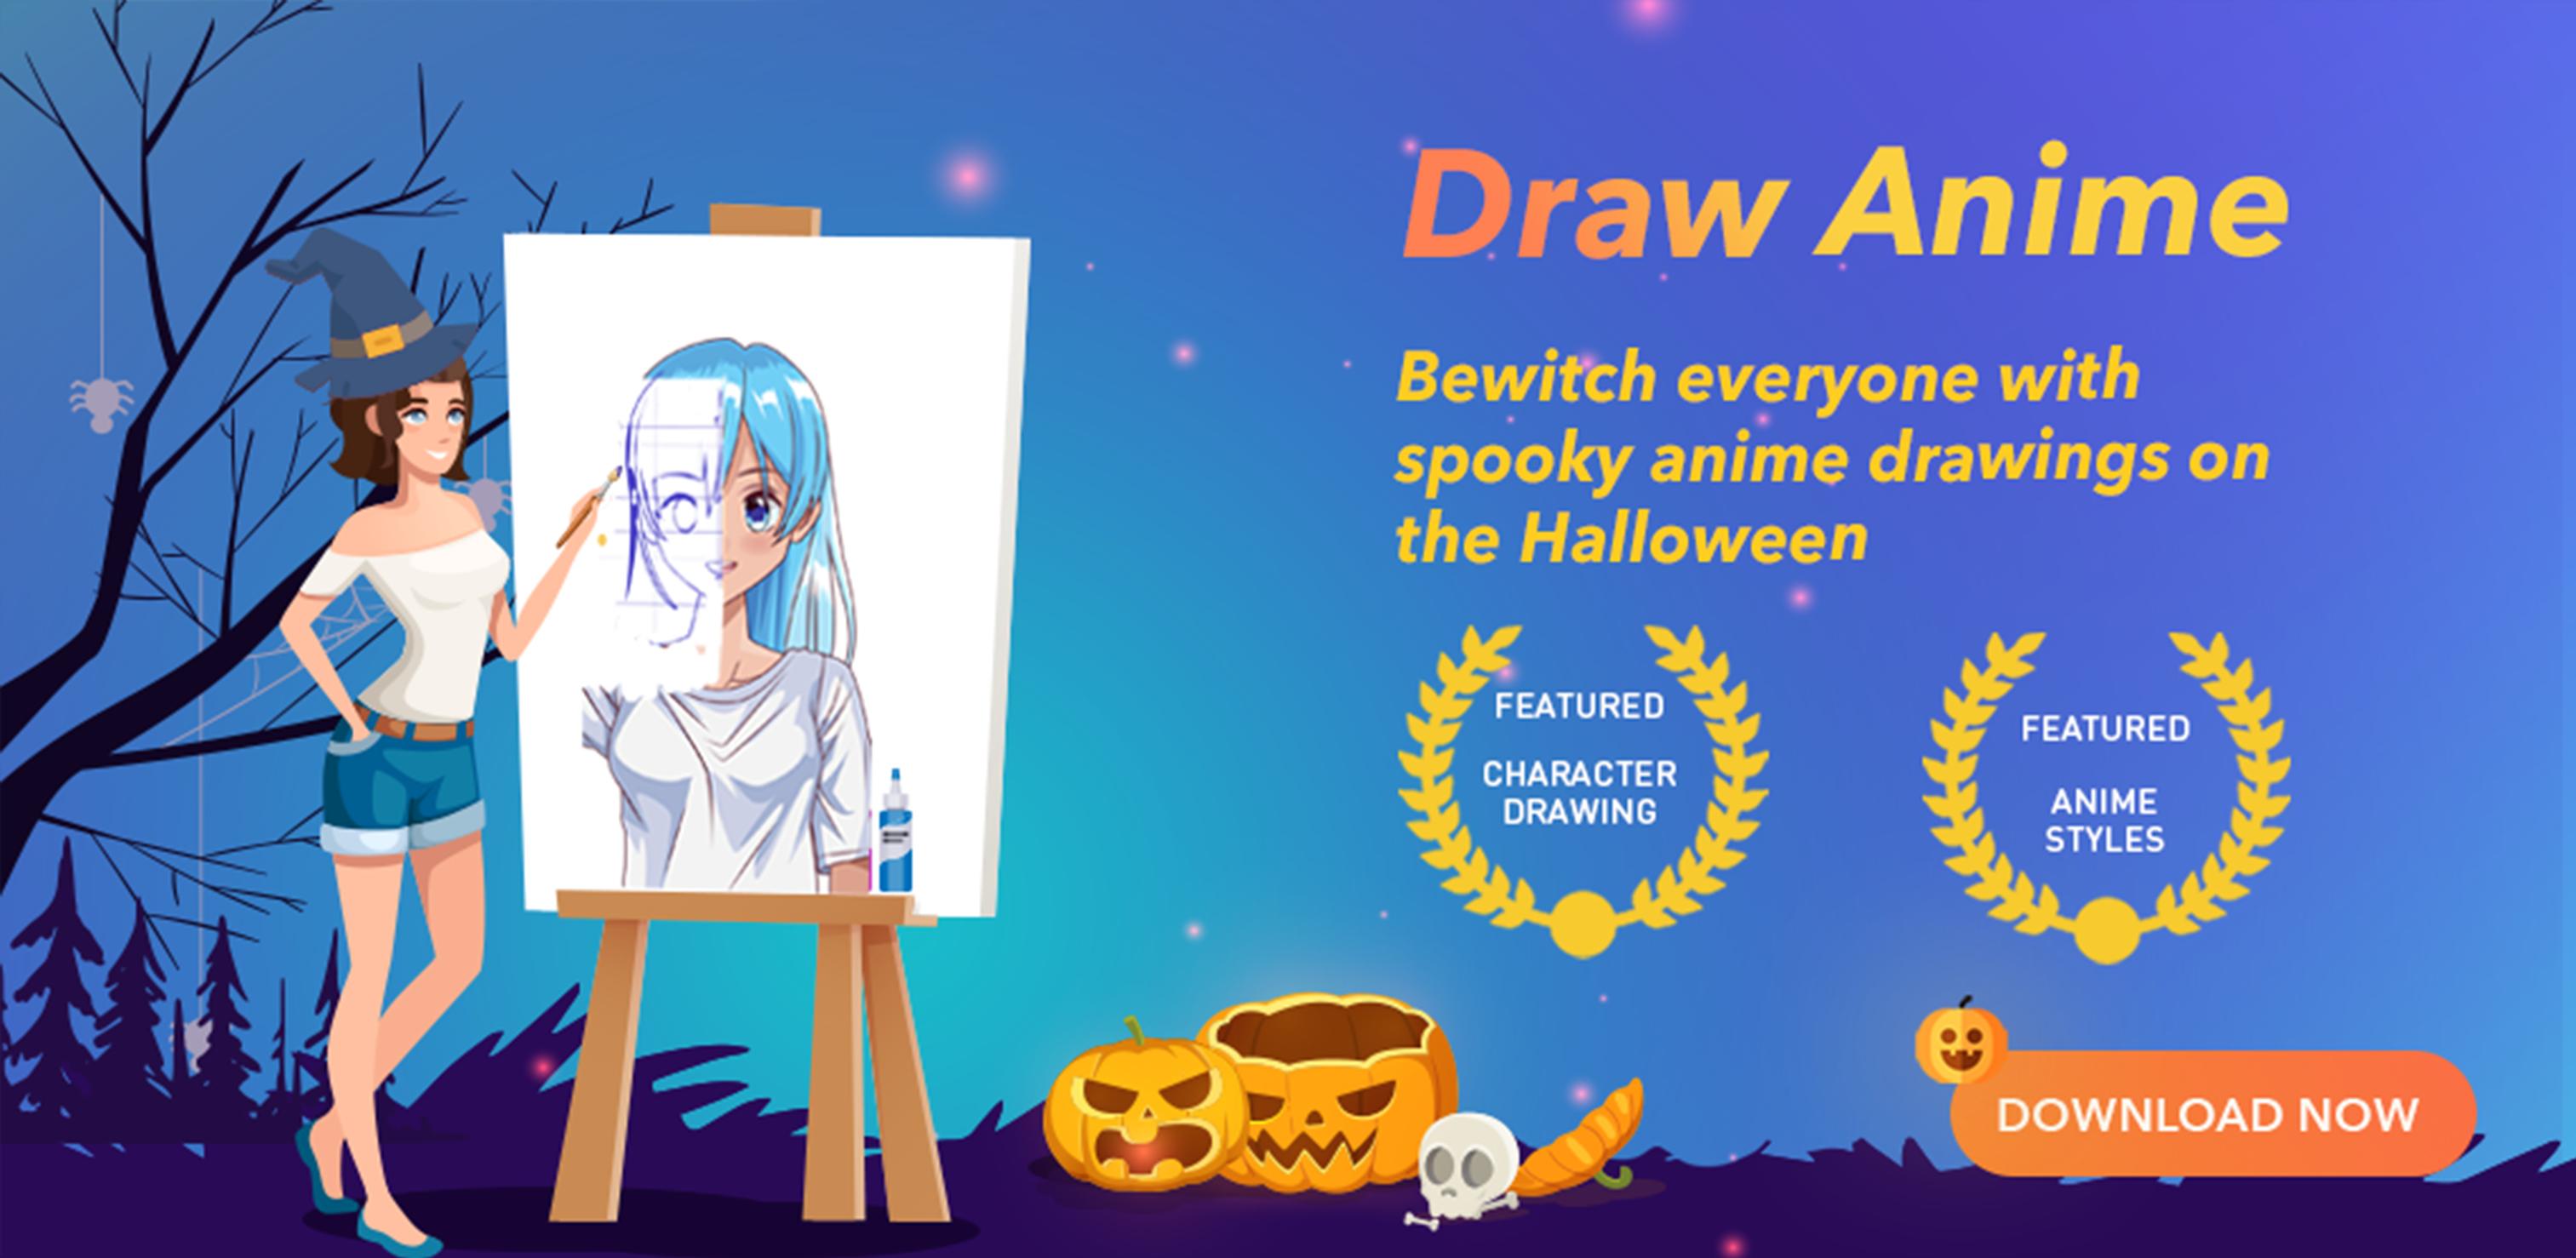 Learn To Draw Anime Step By Step For Android Apk Download